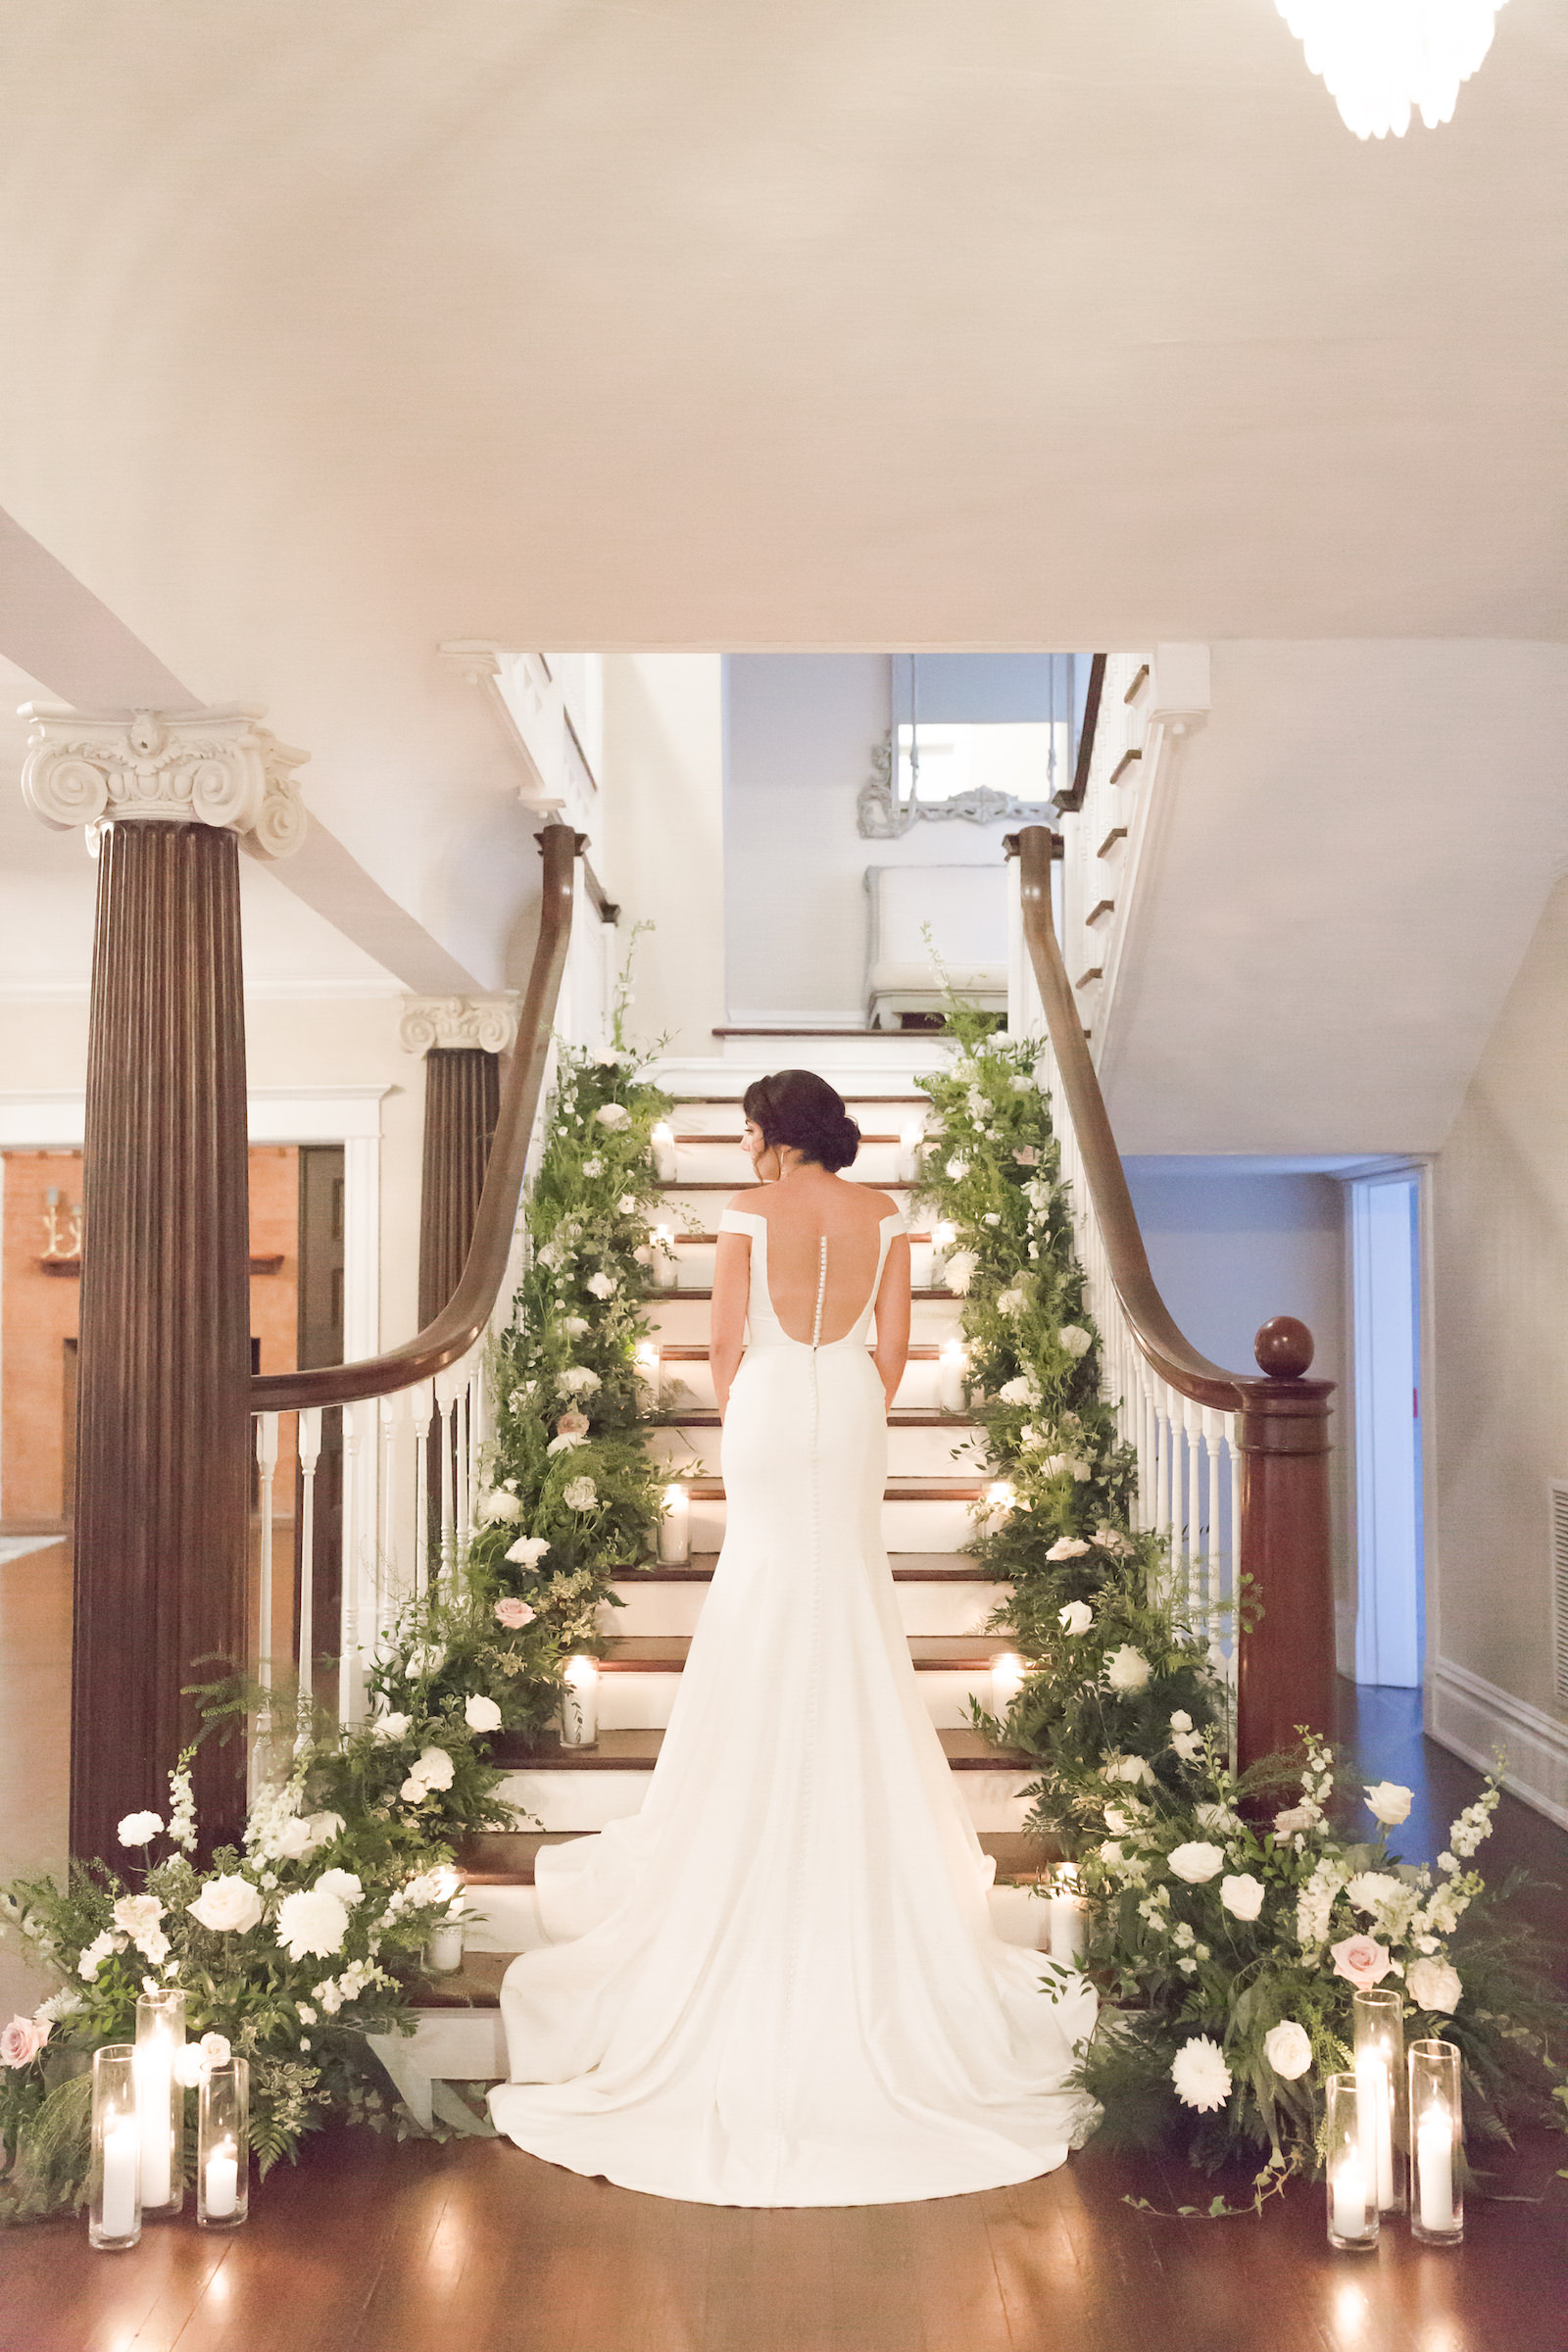 Classic bride wearing open back and cap sleeve wedding dress on staircase of historic Tampa wedding venue The Orlo, lush greenery and white floral arrangements lining staircase | Tampa Bay wedding planner Elegant Affairs by Design